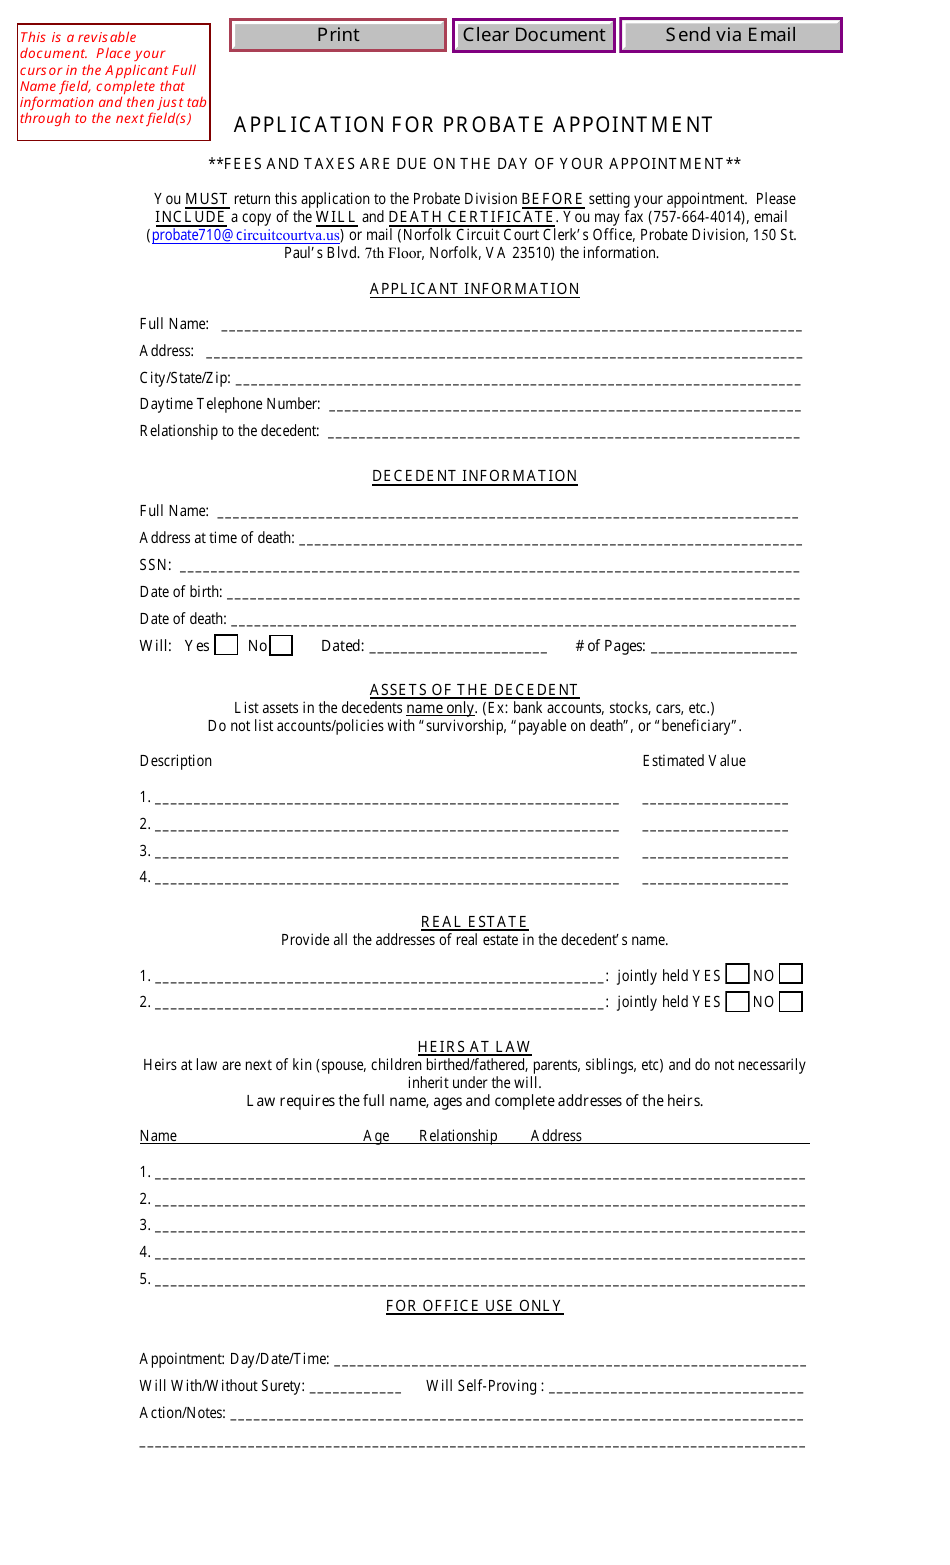 Application for Probate Appointment - Norfolk, Virginia, Page 1